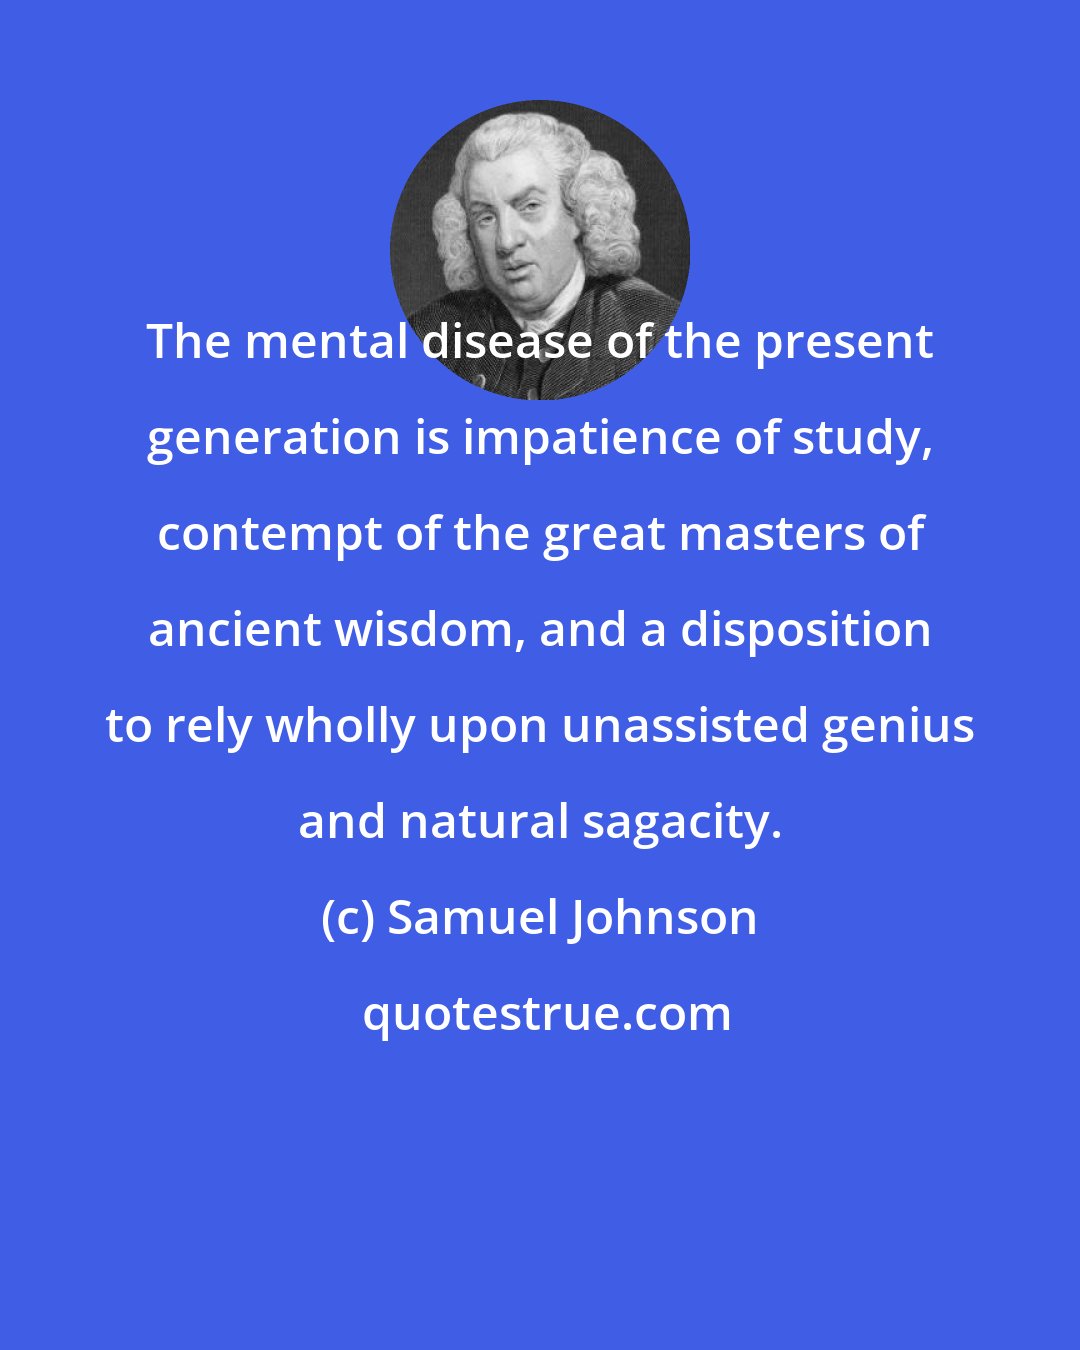 Samuel Johnson: The mental disease of the present generation is impatience of study, contempt of the great masters of ancient wisdom, and a disposition to rely wholly upon unassisted genius and natural sagacity.